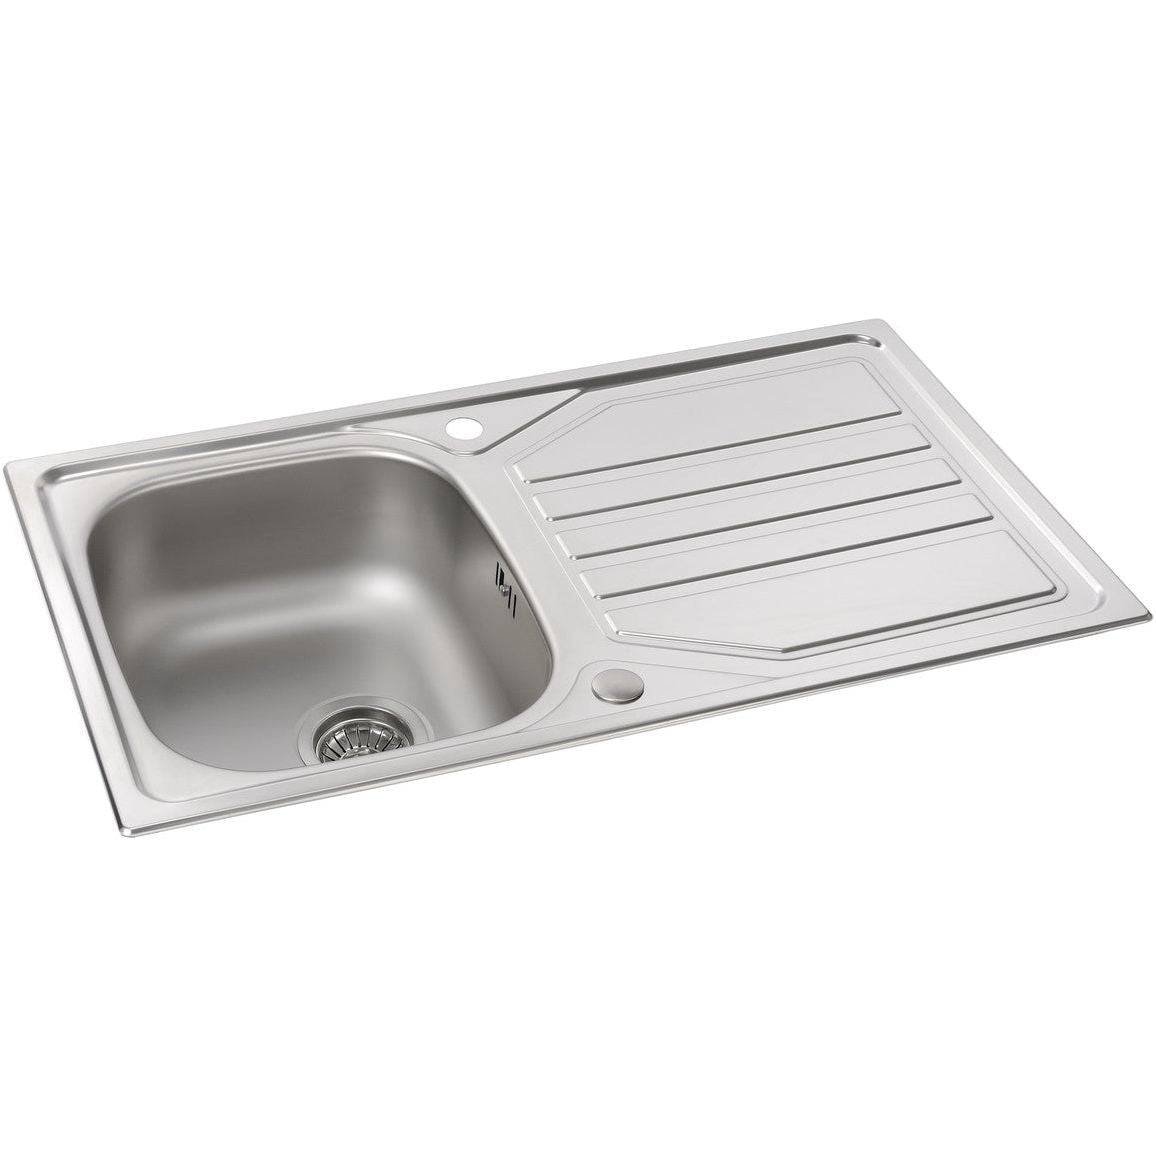 Abode Mikro 1B & Drainer Inset Sink (Boxed inc. waste) - St/Steel